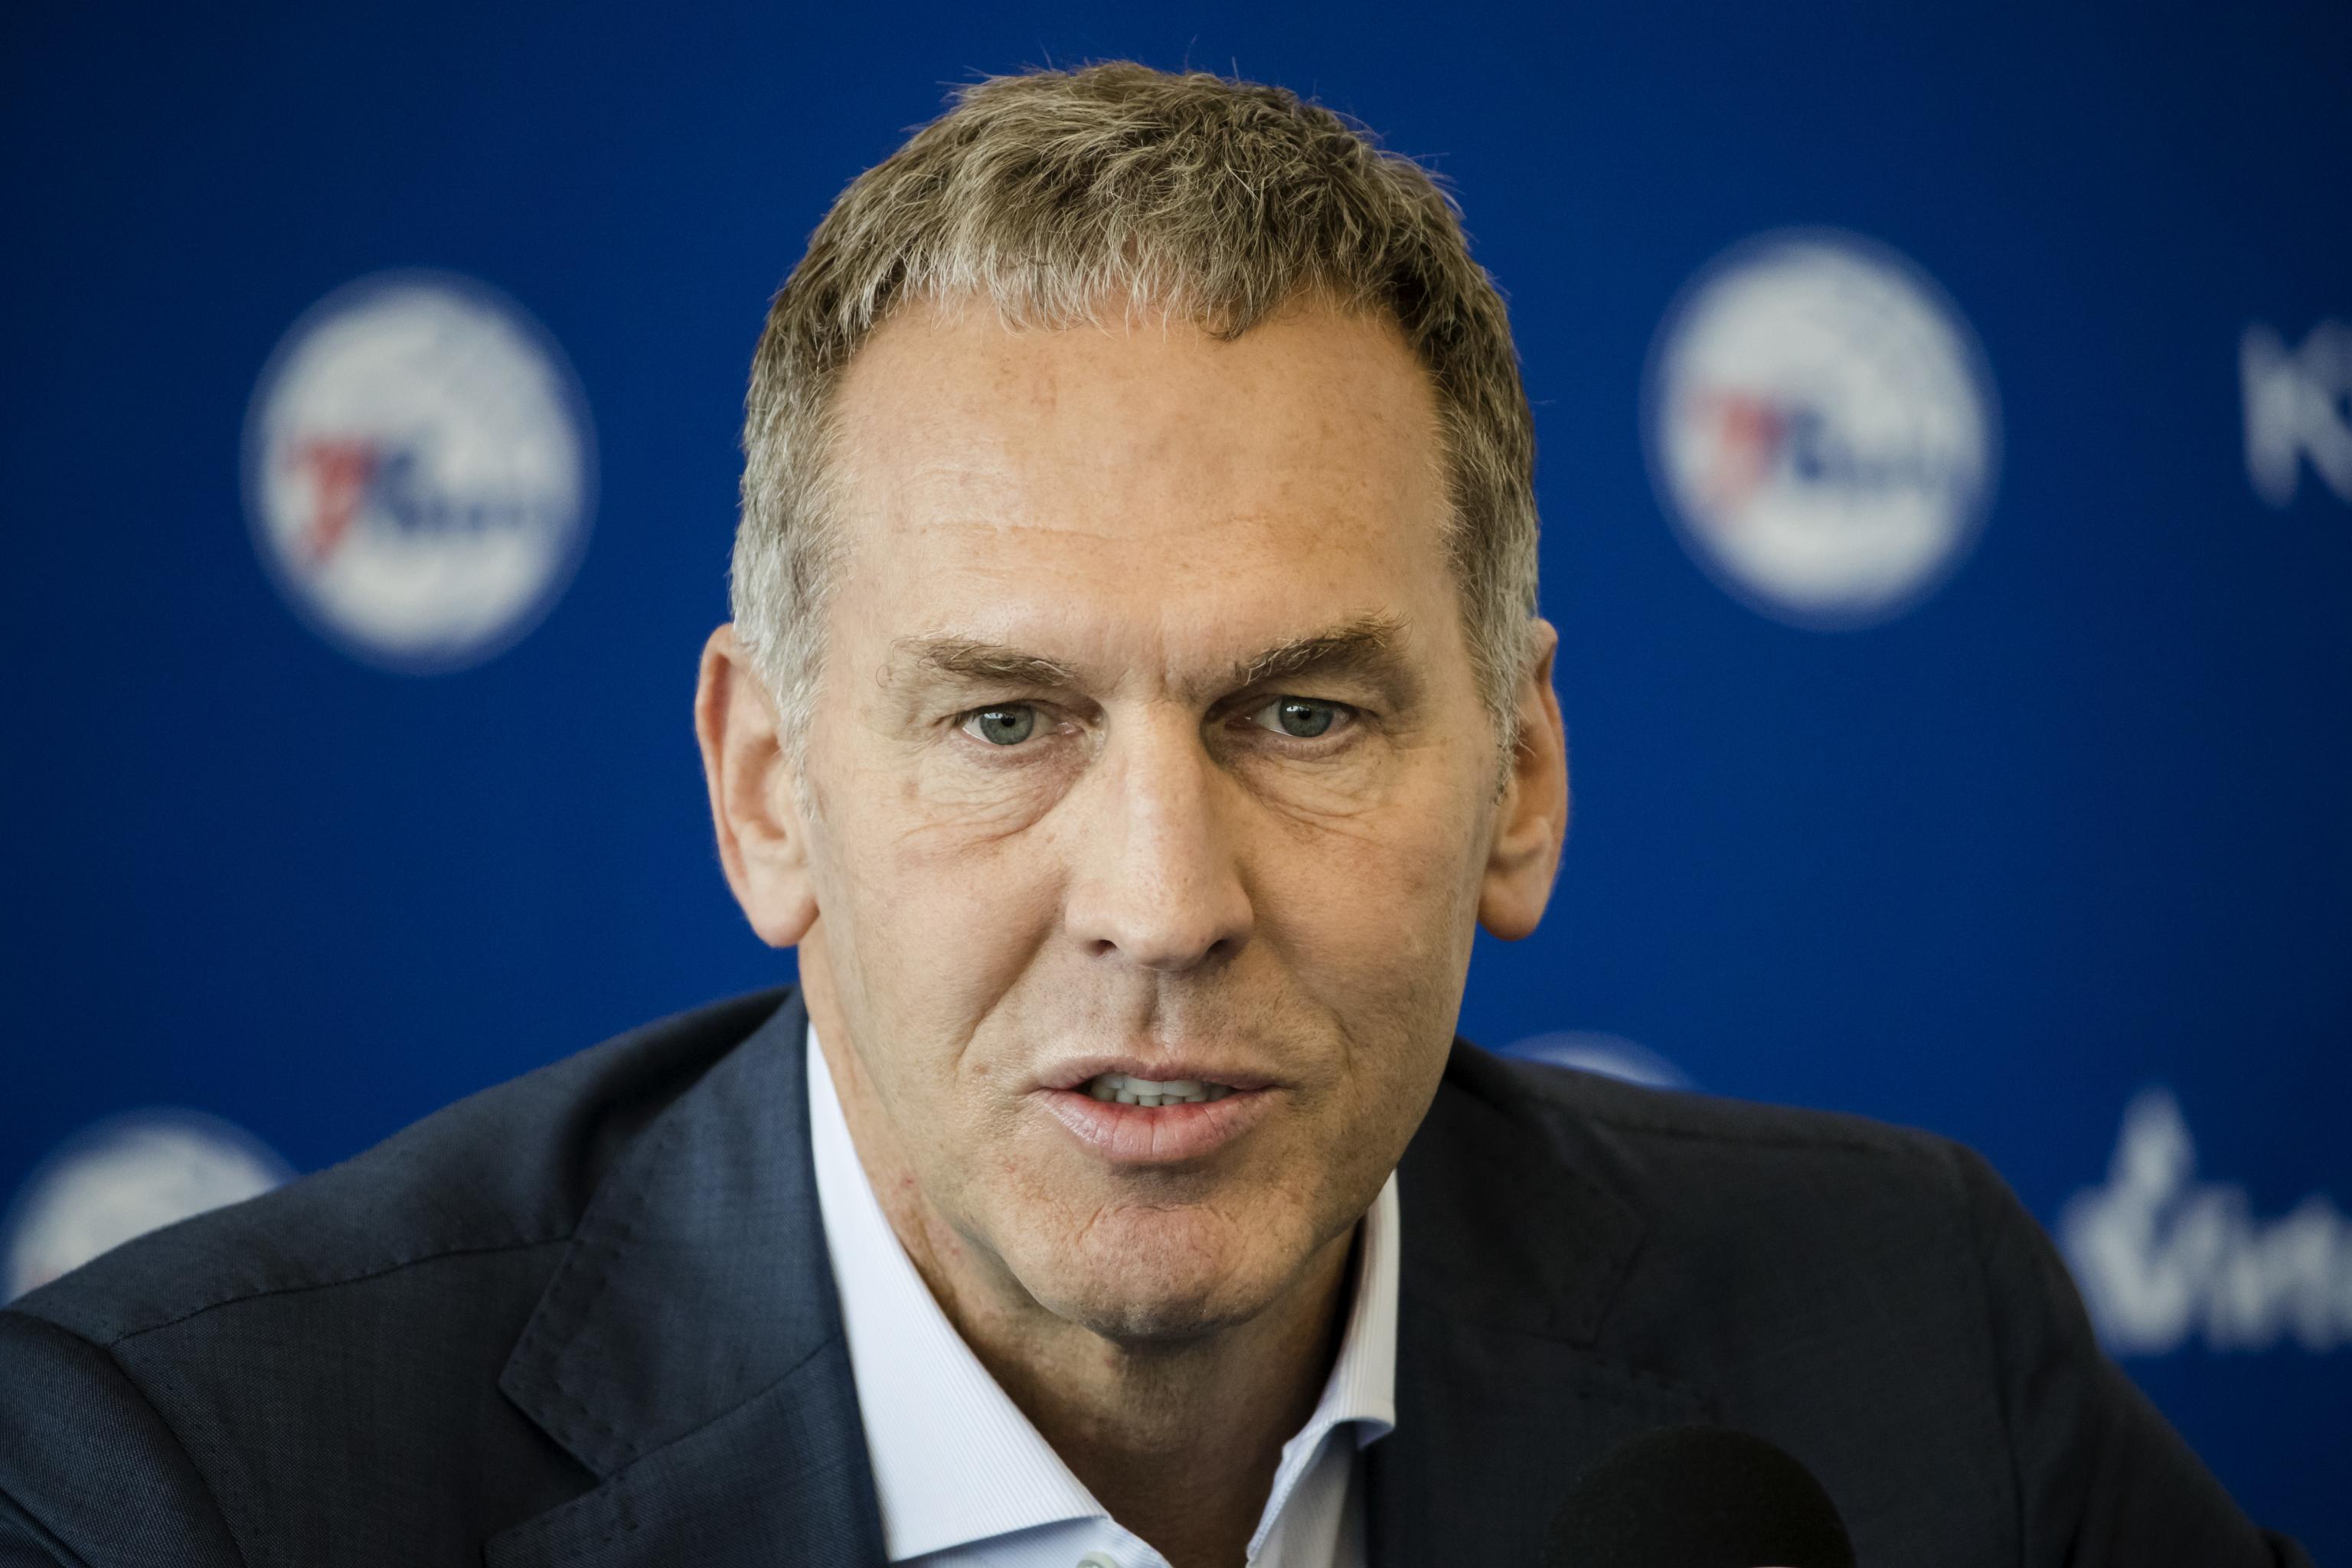 Bryan Colangelo 76ers Part Ways After Burner Account Allegations Emerge Bleacher Report Latest News Videos And Highlights